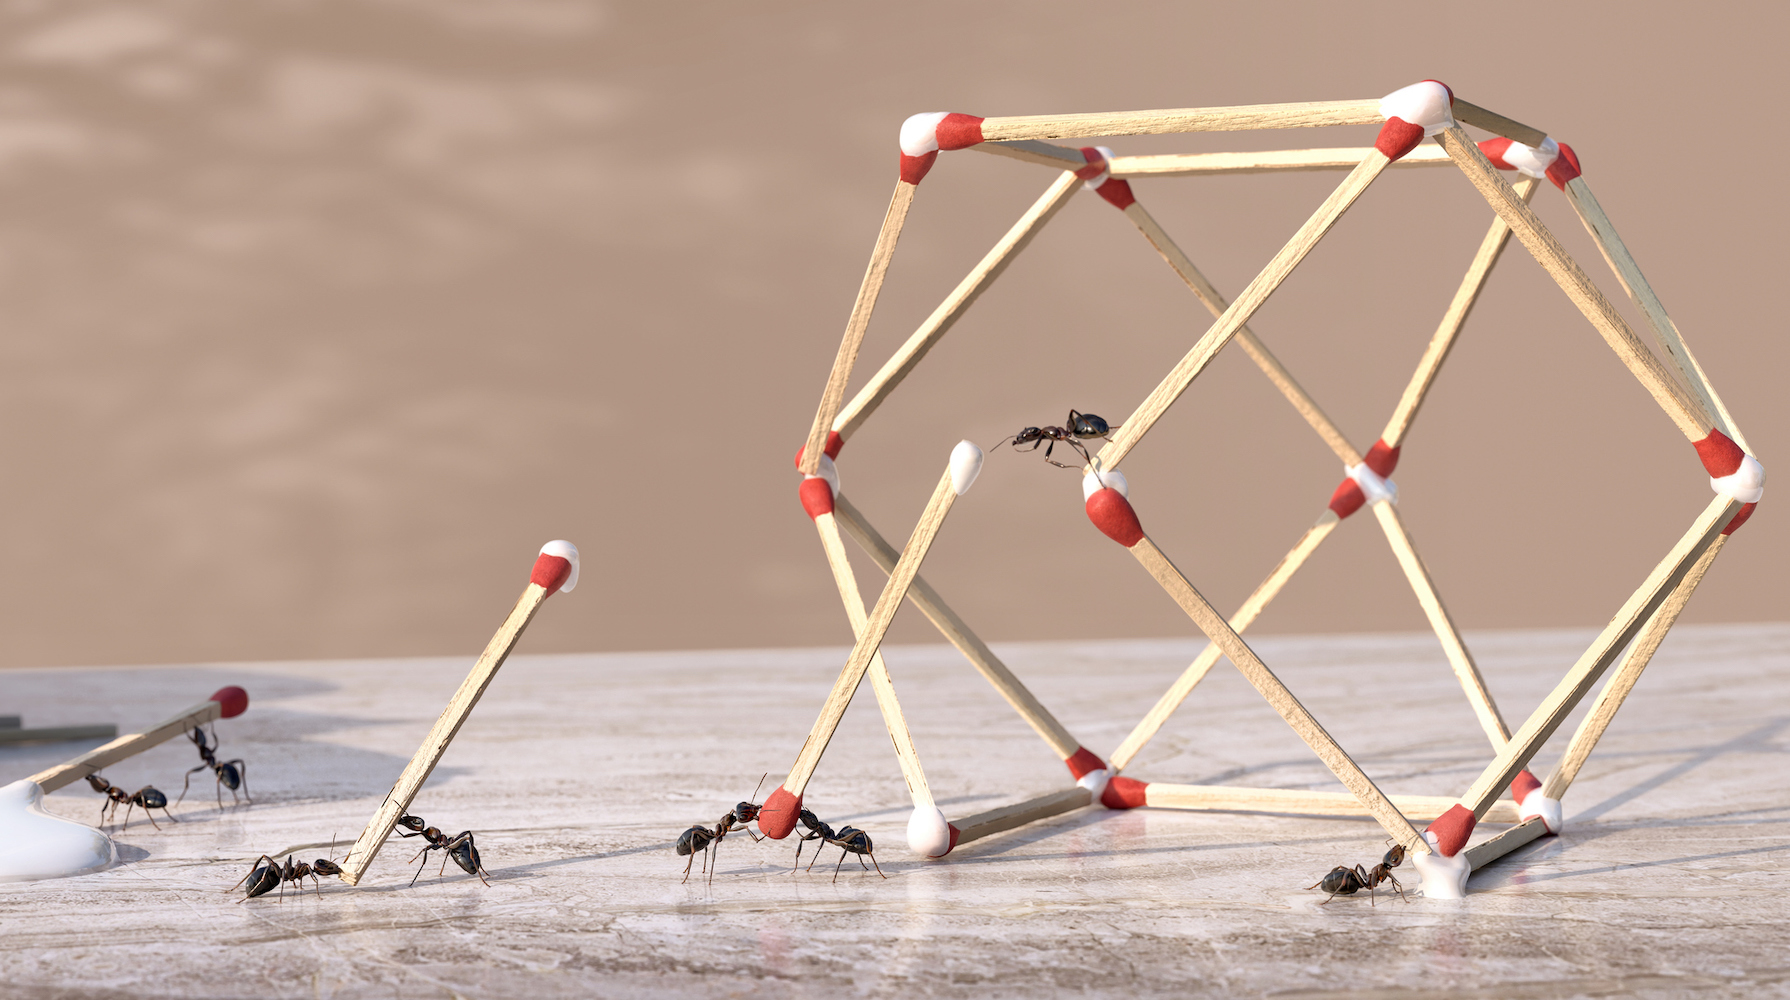 A group of ants working as a team to form a three-dimensional geometric sculpture from glue and matches.  The ants dip the ends of matchsticks in glue dripping from a bottle of glue and are placed in position to form the shape on a marble worktop.